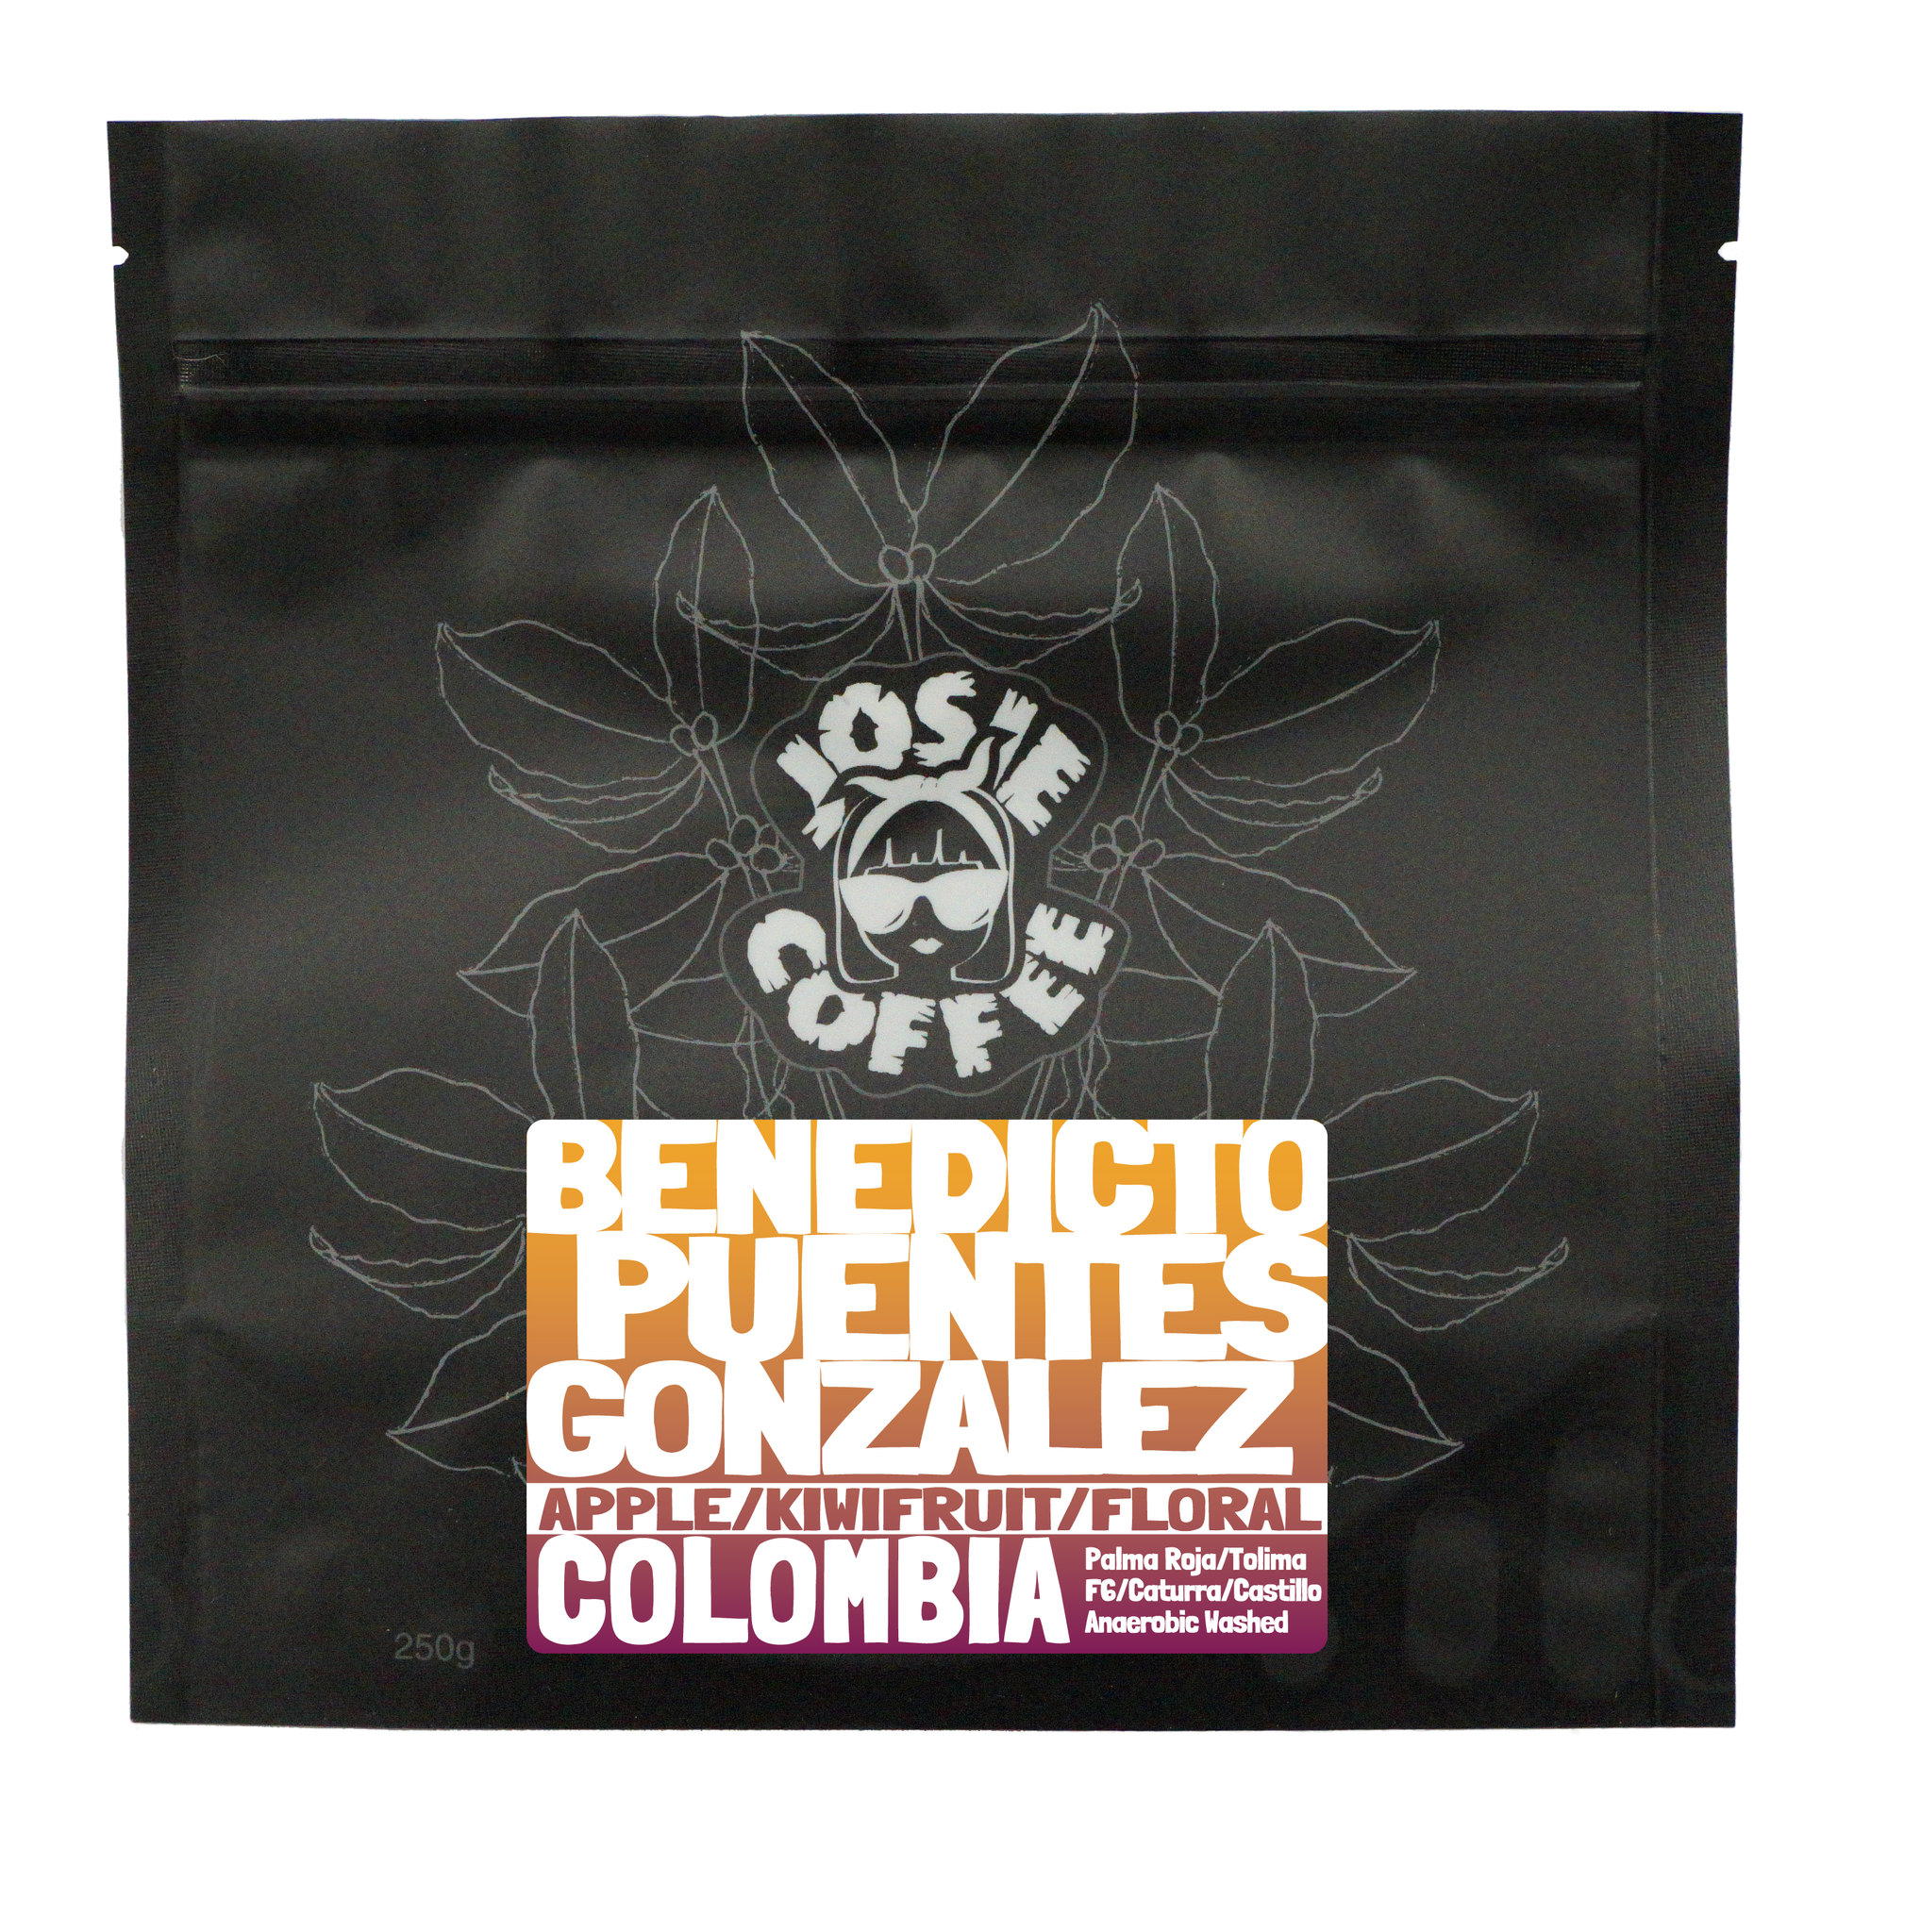 Colombia - Benedicto Peuntes Gonzales - Anaerobic Washed